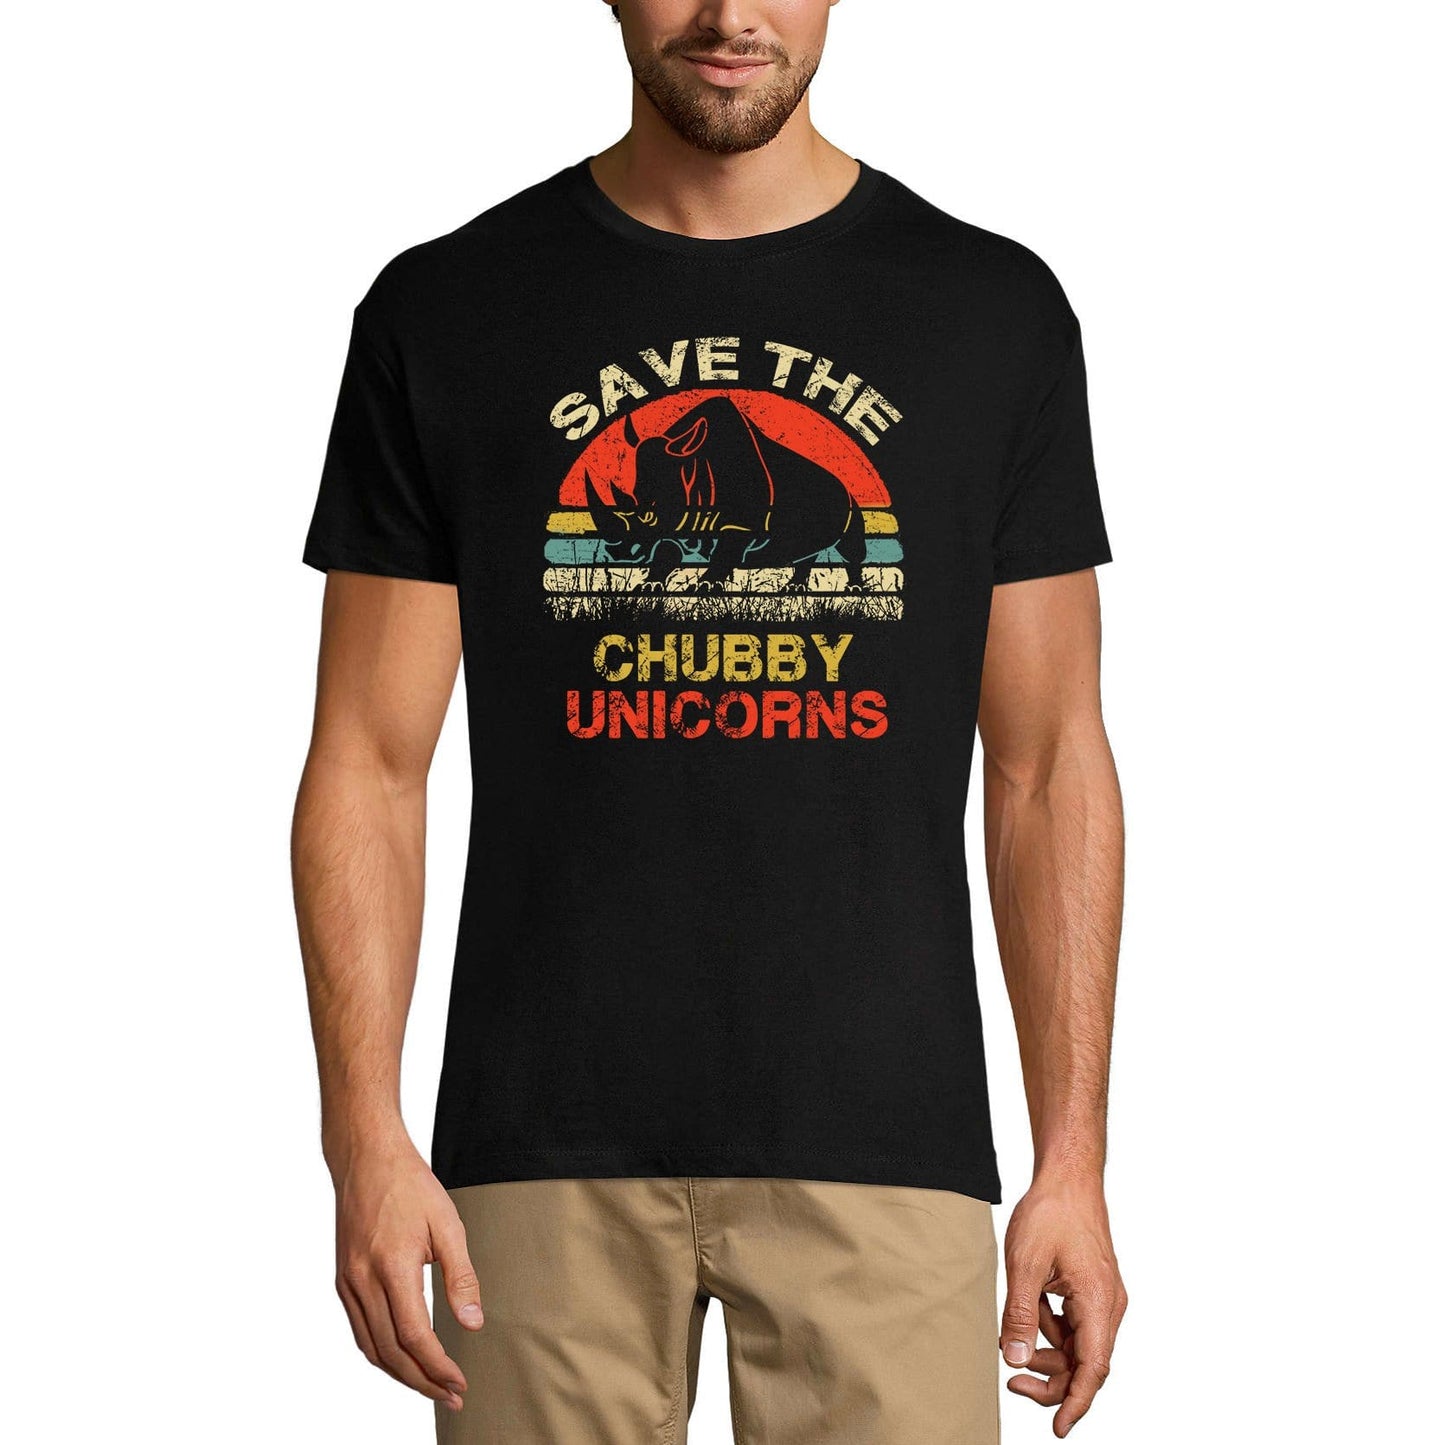 ULTRABASIC Men's Vintage T-Shirt Save the Chubby Unicorns - Funny Quote Tees